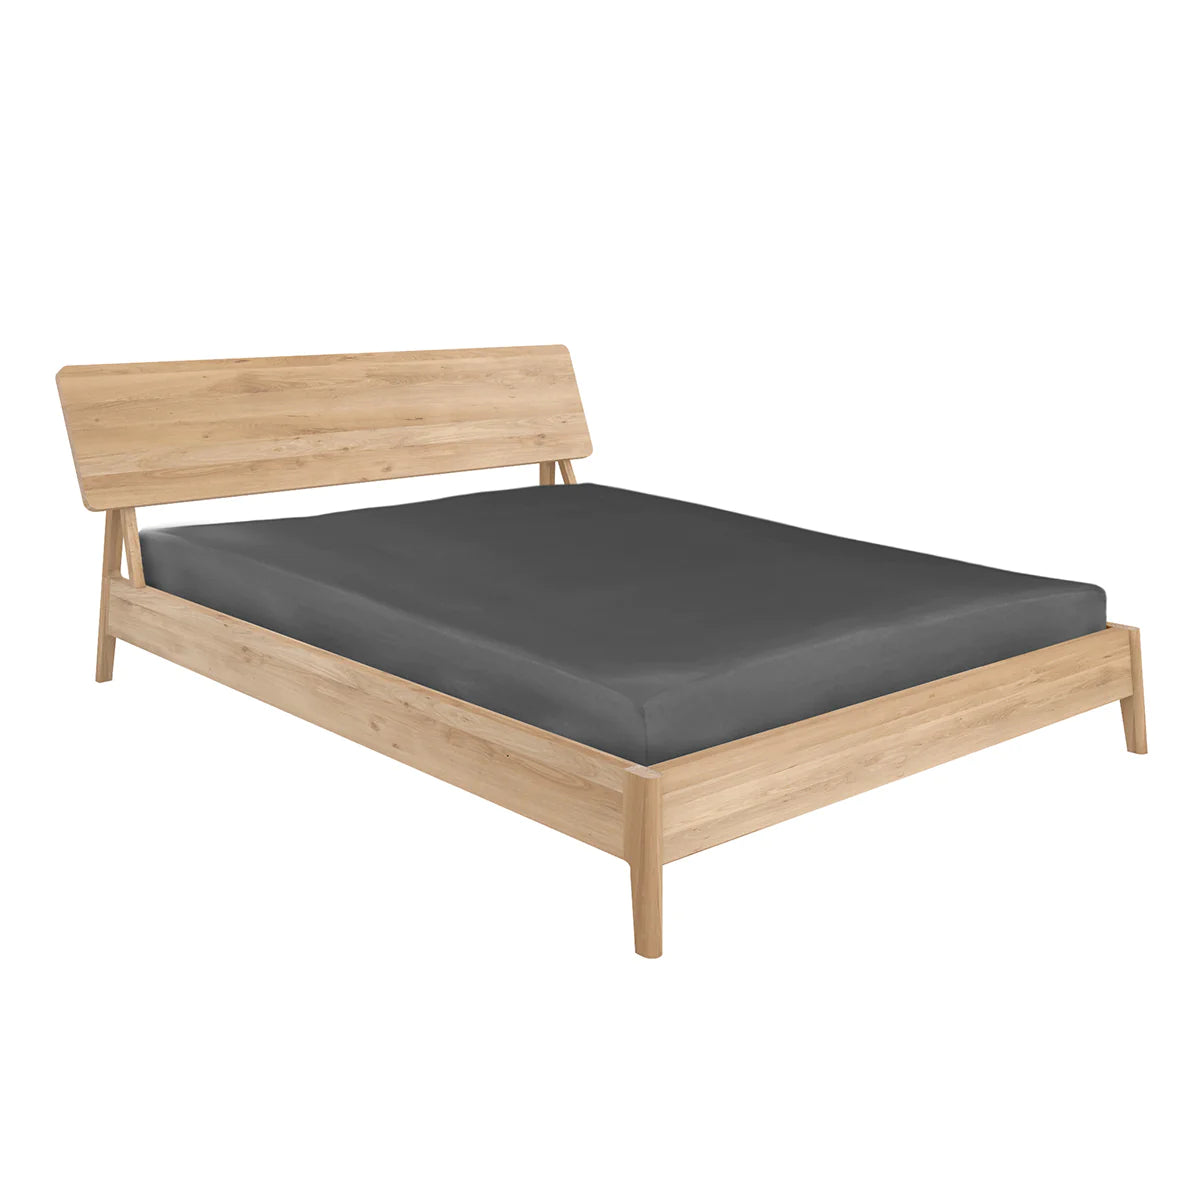 Ethnicraft Oak Air Queen Bed is available from Make Your House A Home, Bendigo, Victoria, Australia